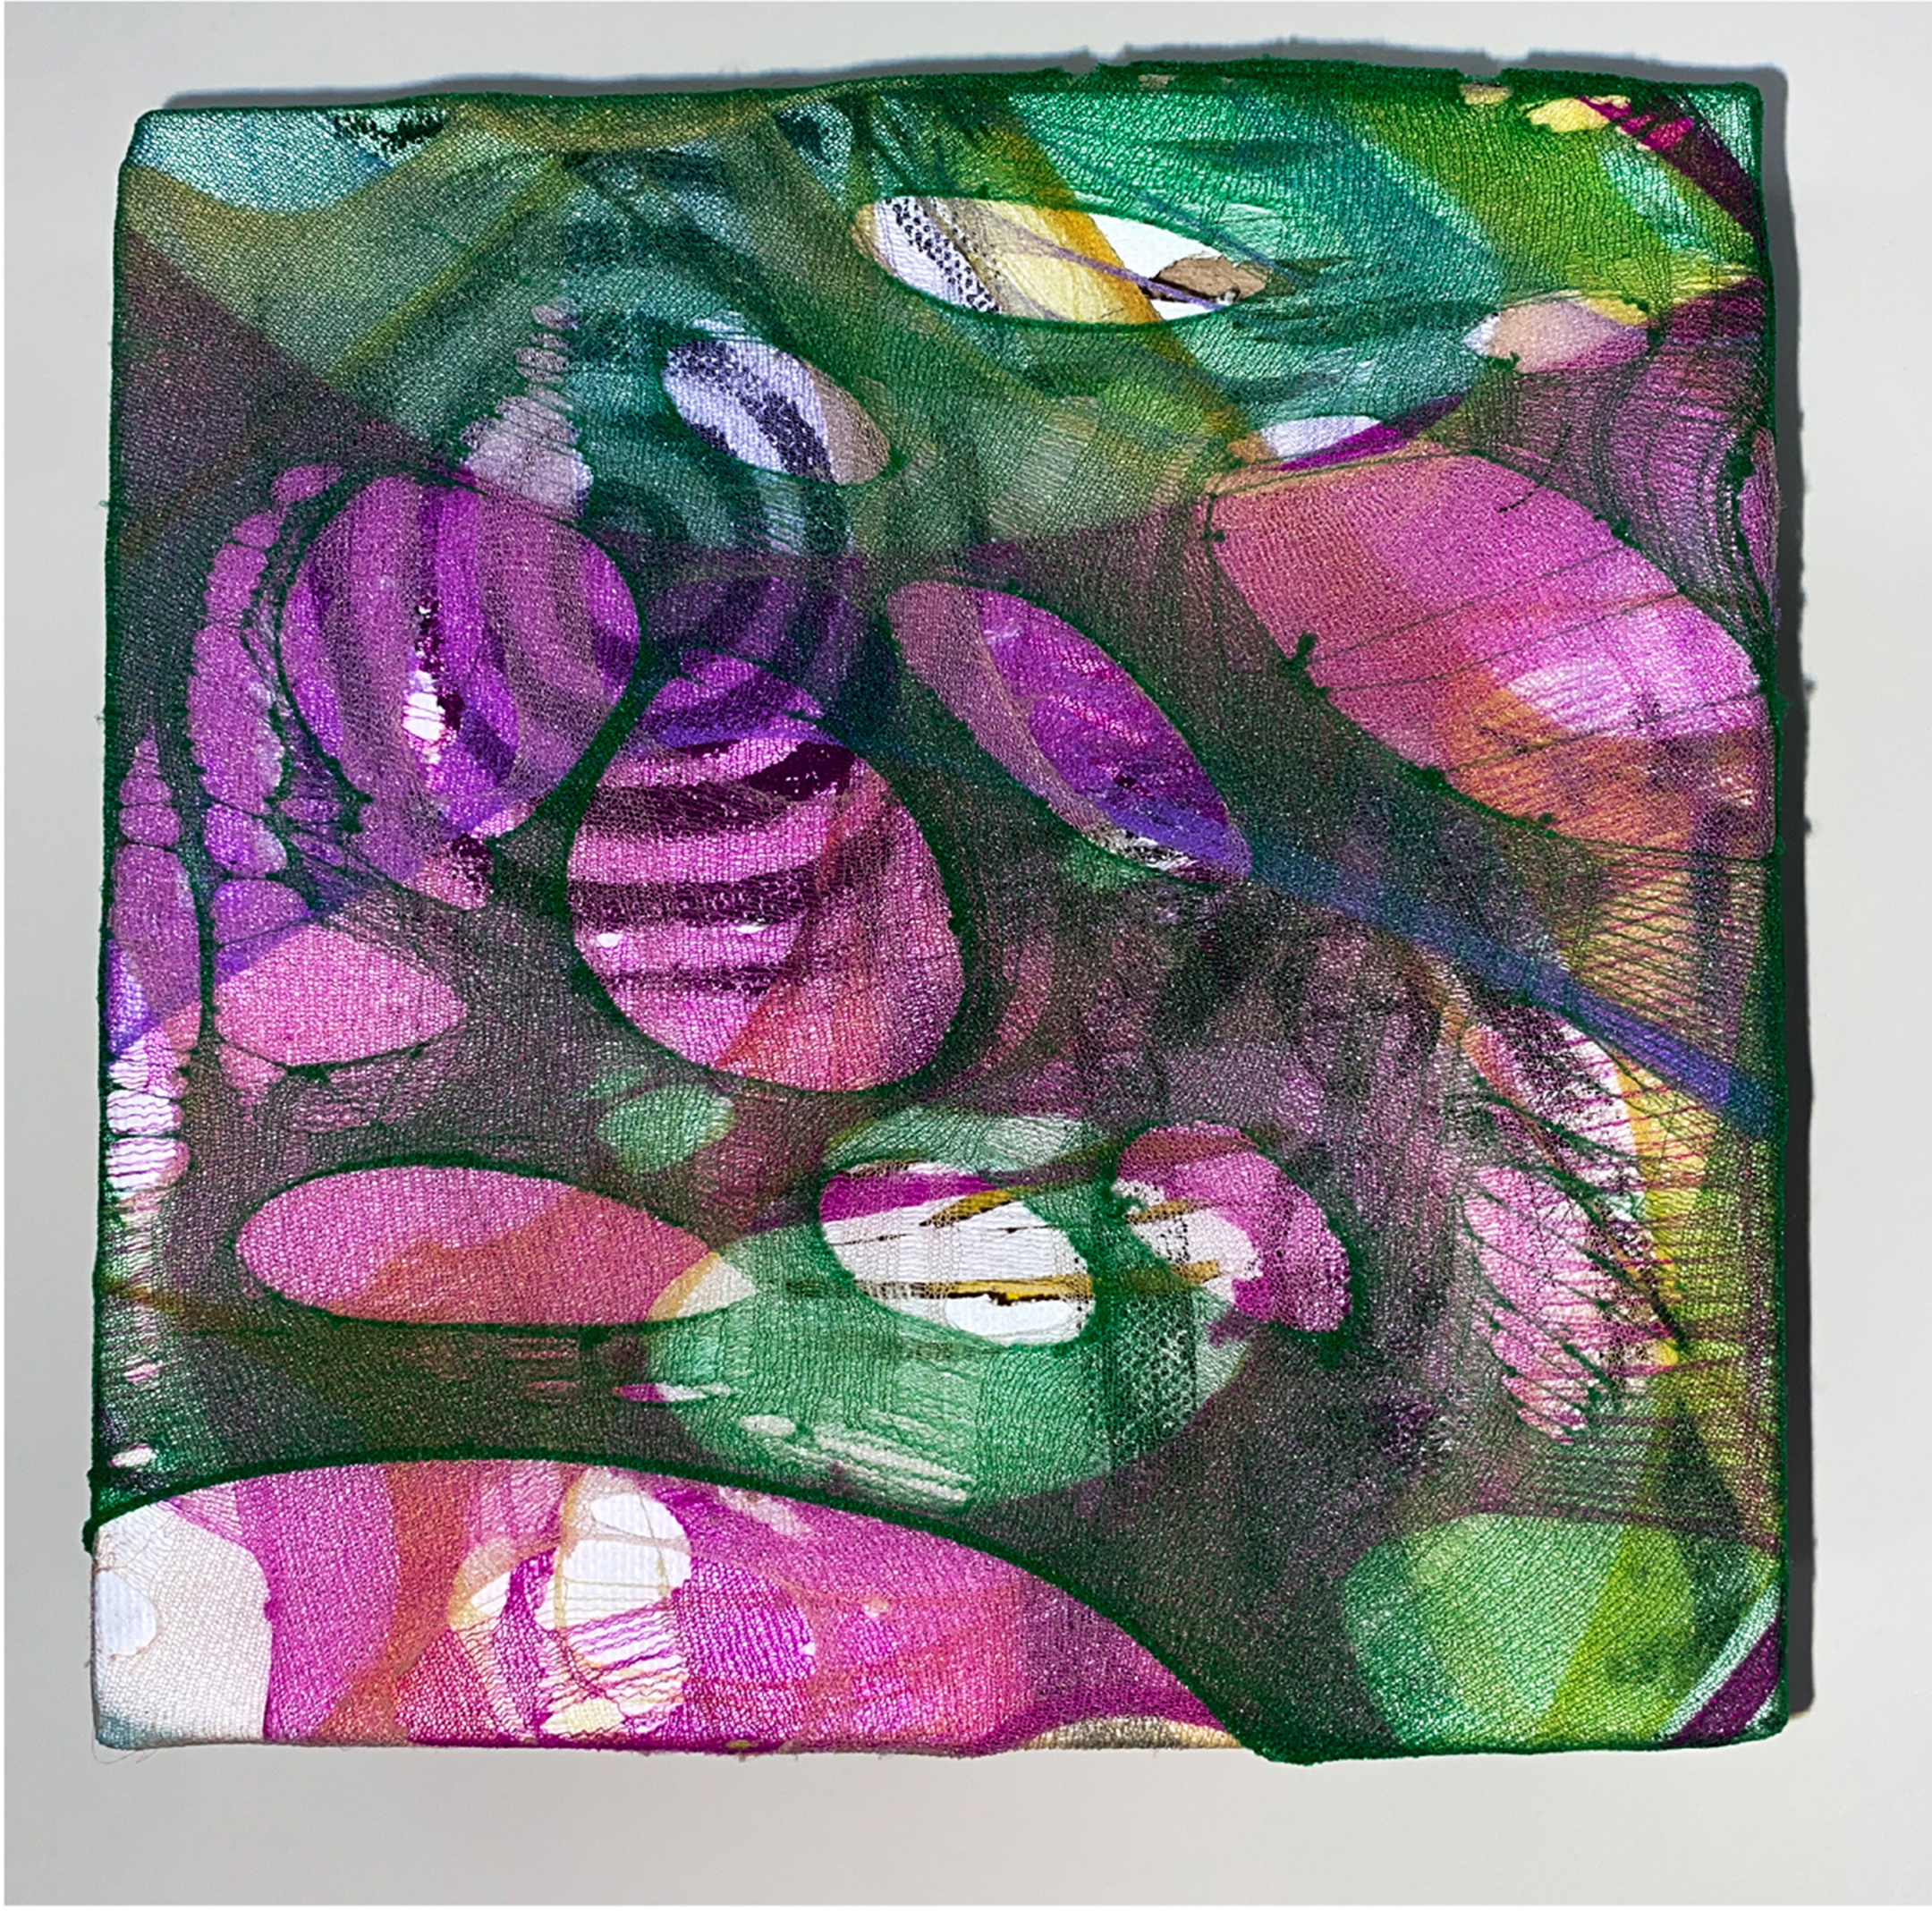 floral pattern created using colorful materials stretched on canvas